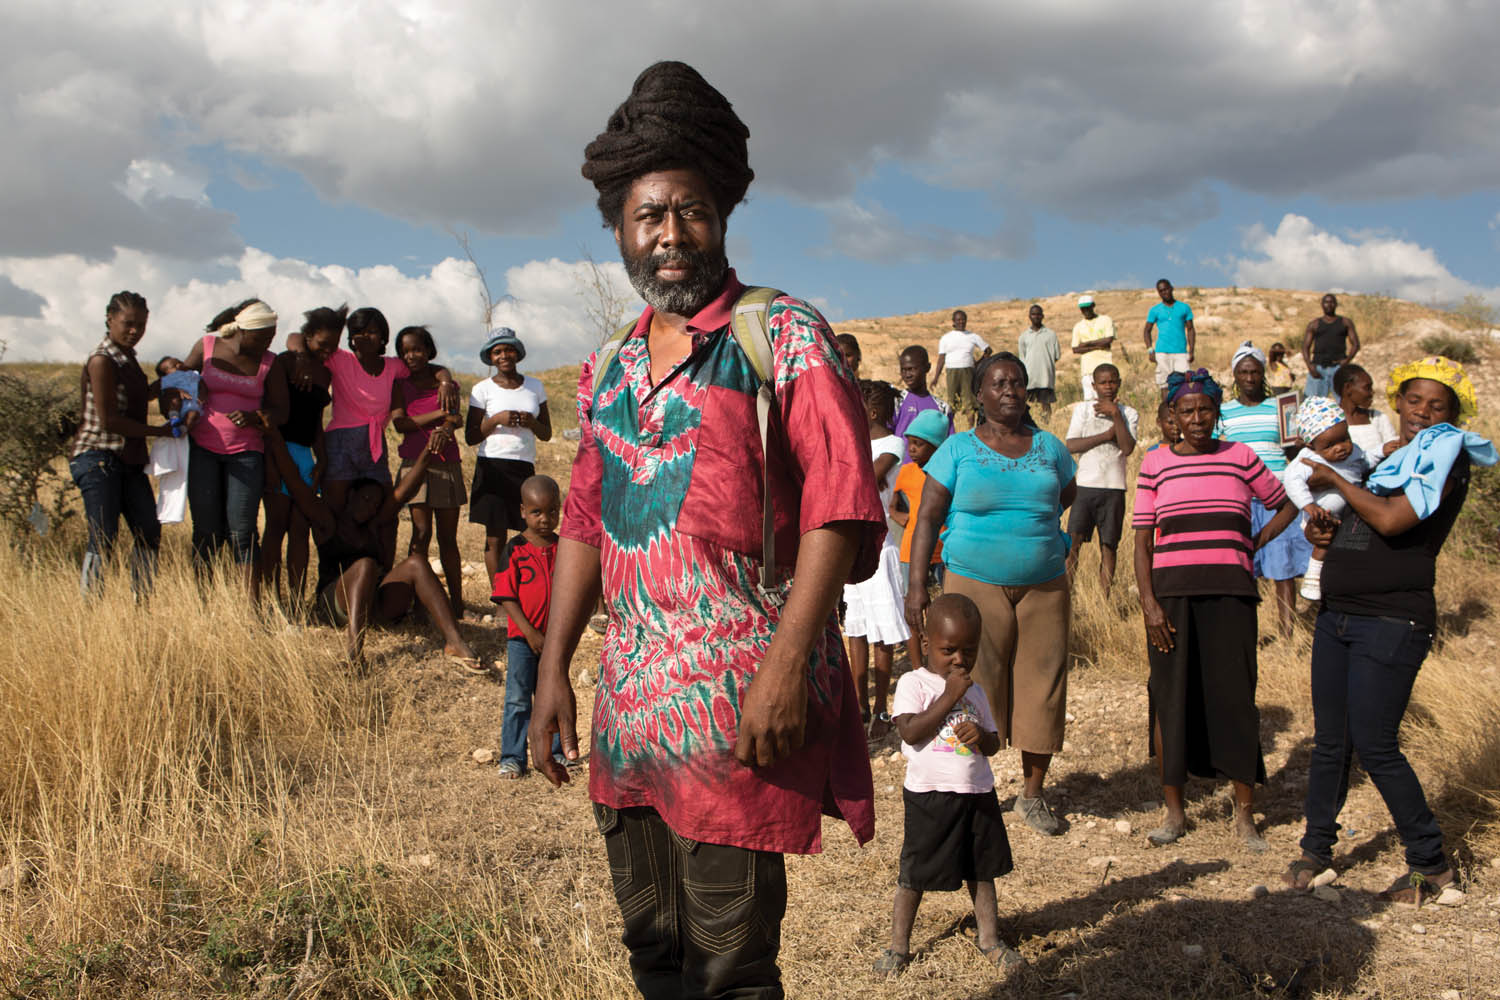 Mona Augustin at the site in Canaan where, in 2012, 126 families bought land rights in order to establish a camp they called Mozayik. Later, a competing, more powerful claimant forced them to move. Photo by Allison Shelley